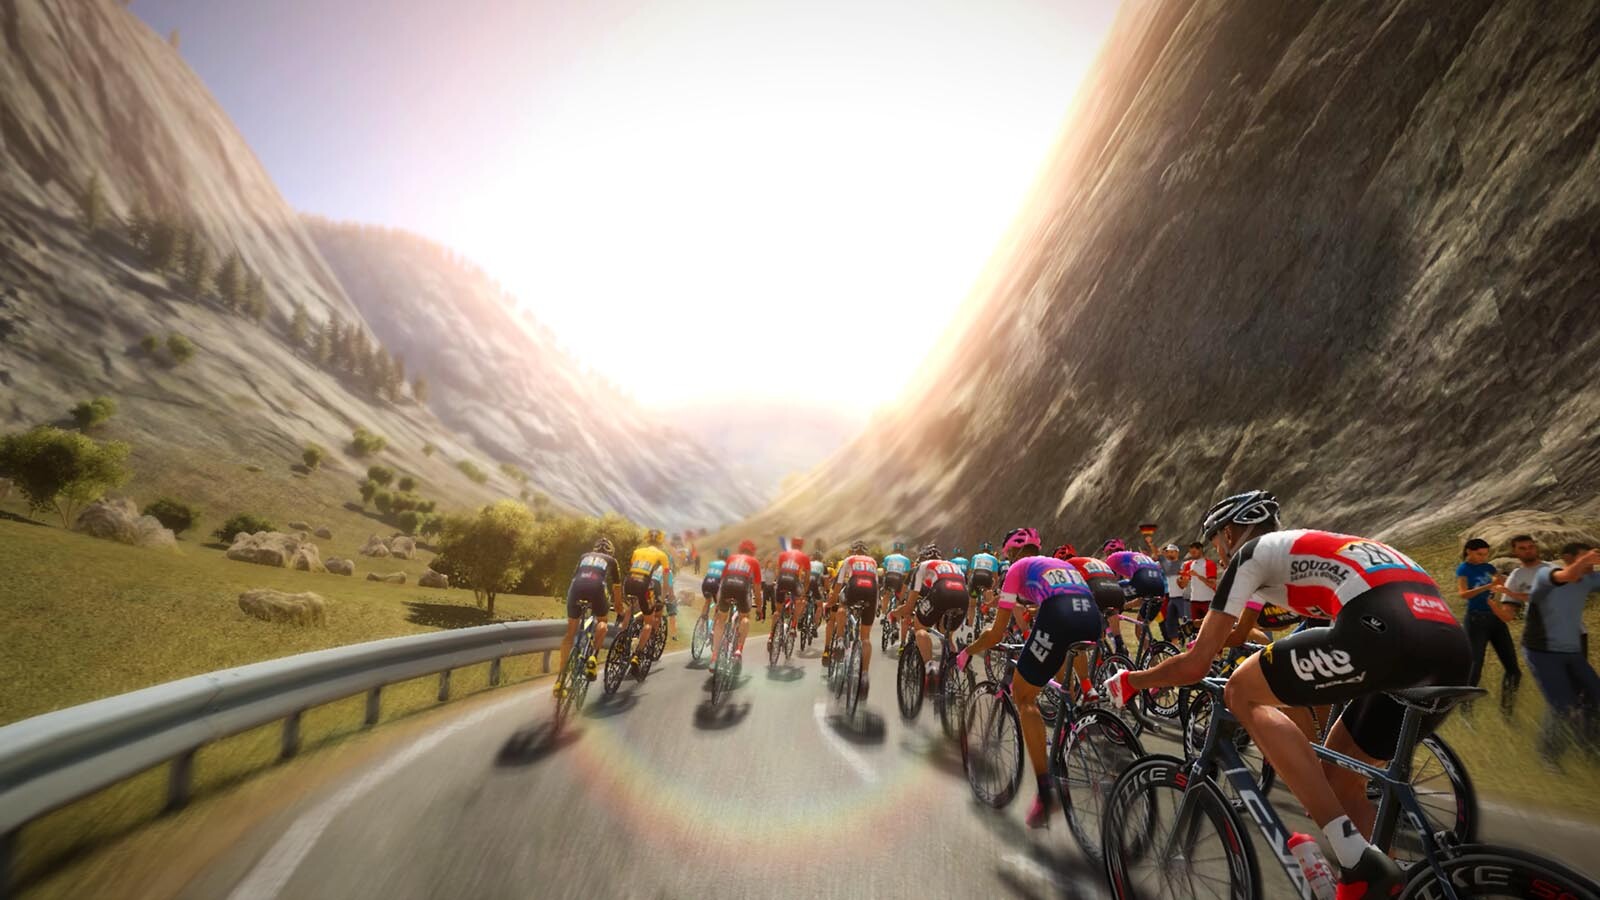 Tour de France 2021 and Pro Cycling Manager 21 Available Now